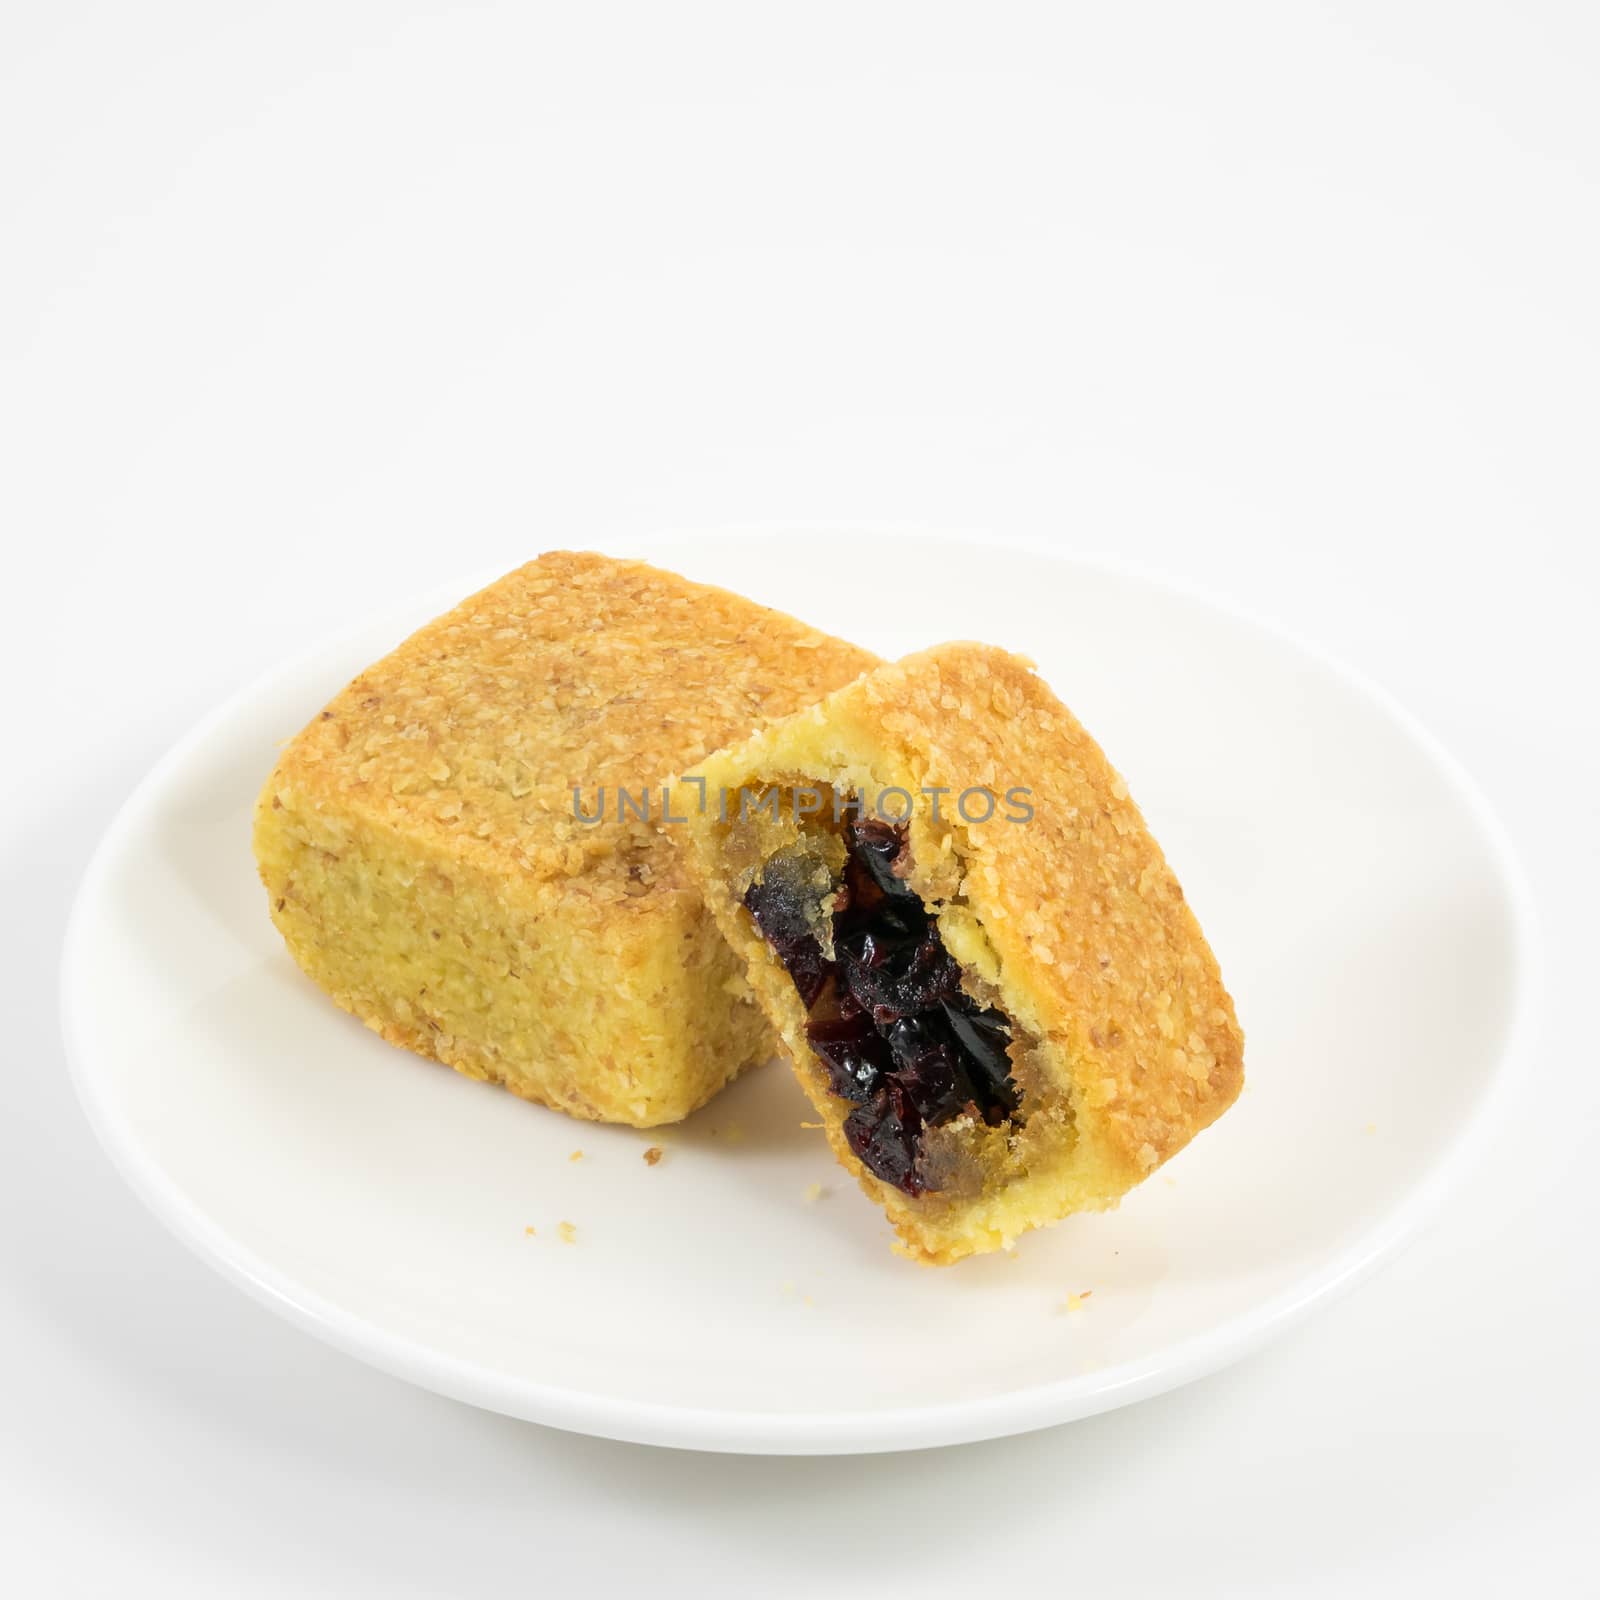 The tasty Taiwanese cranberry pastry cake on the small white dish.